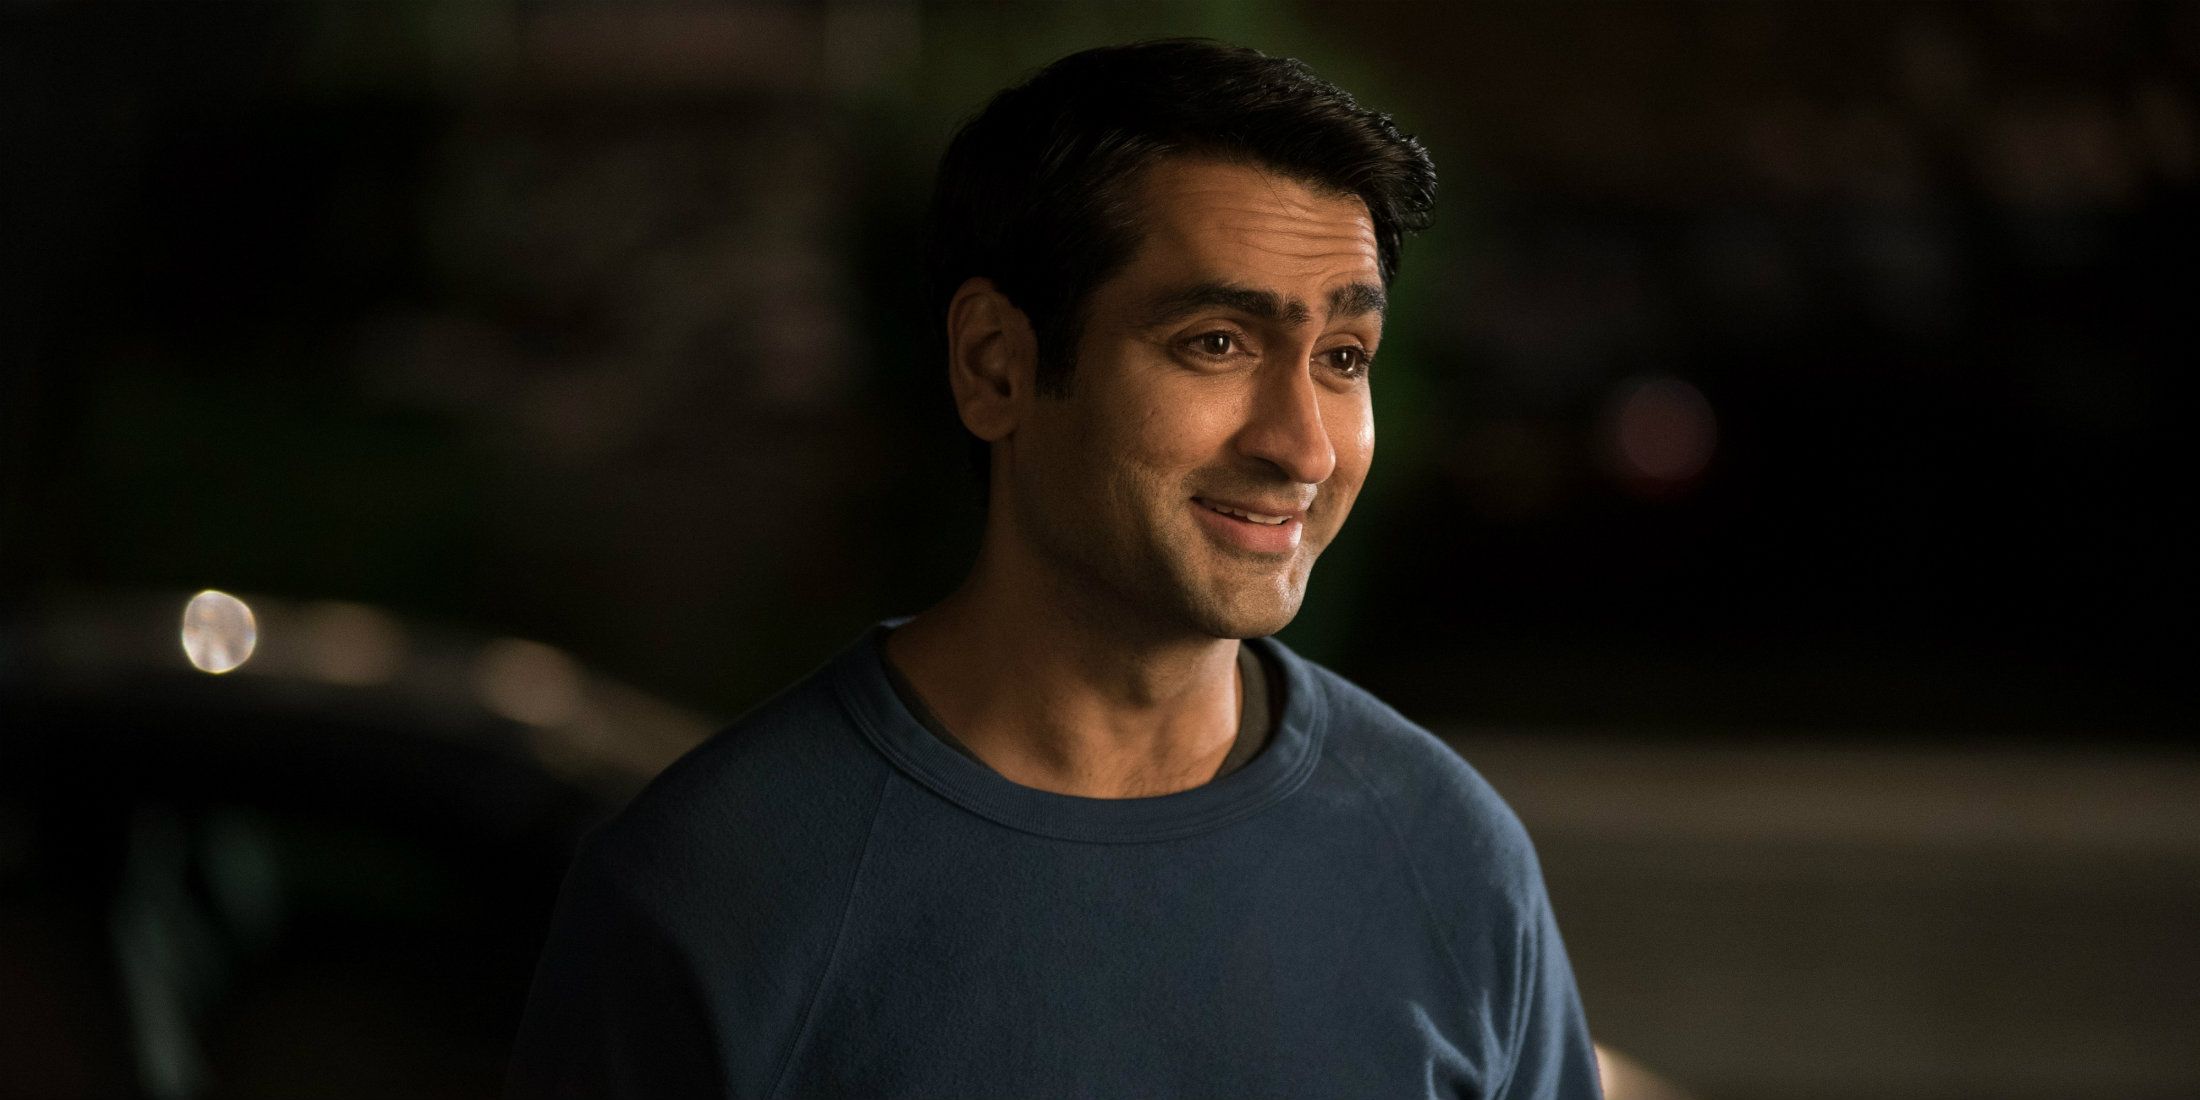 Kumail smiling in The Big Sick